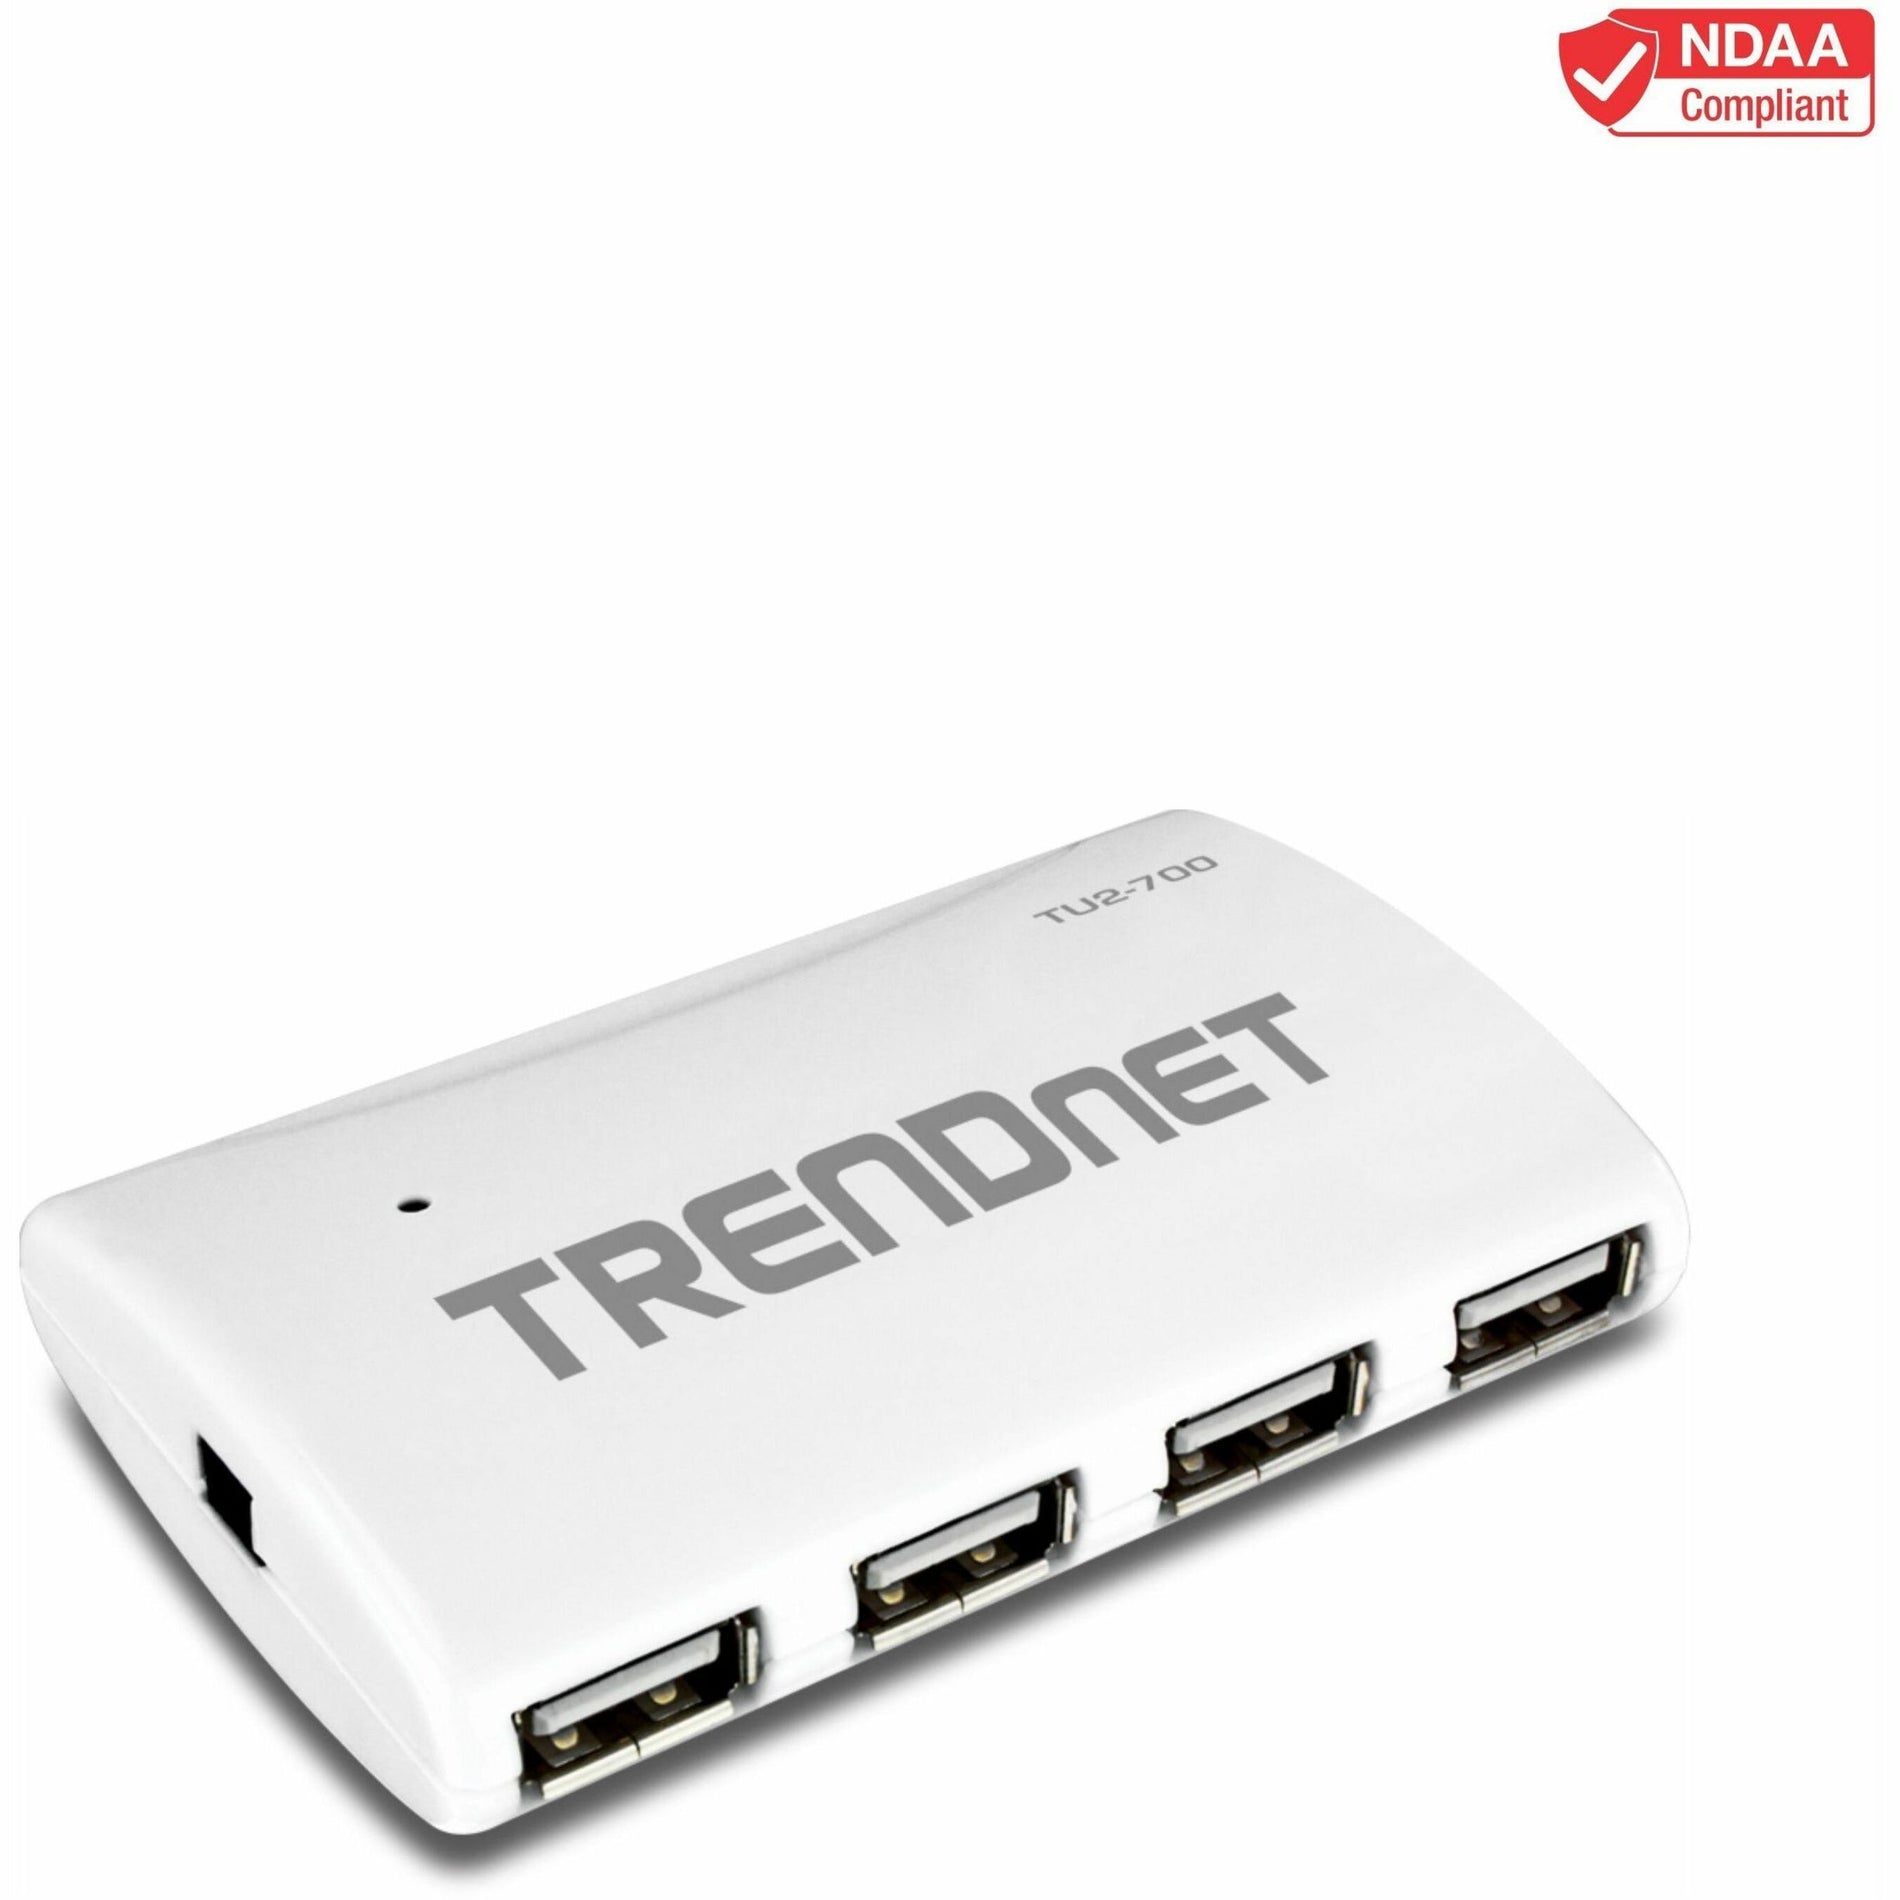 TRENDnet TU2-700 High Speed USB 2.0 7-port Hub with Power Adapter, Up to 480 Mbps Connection Speeds